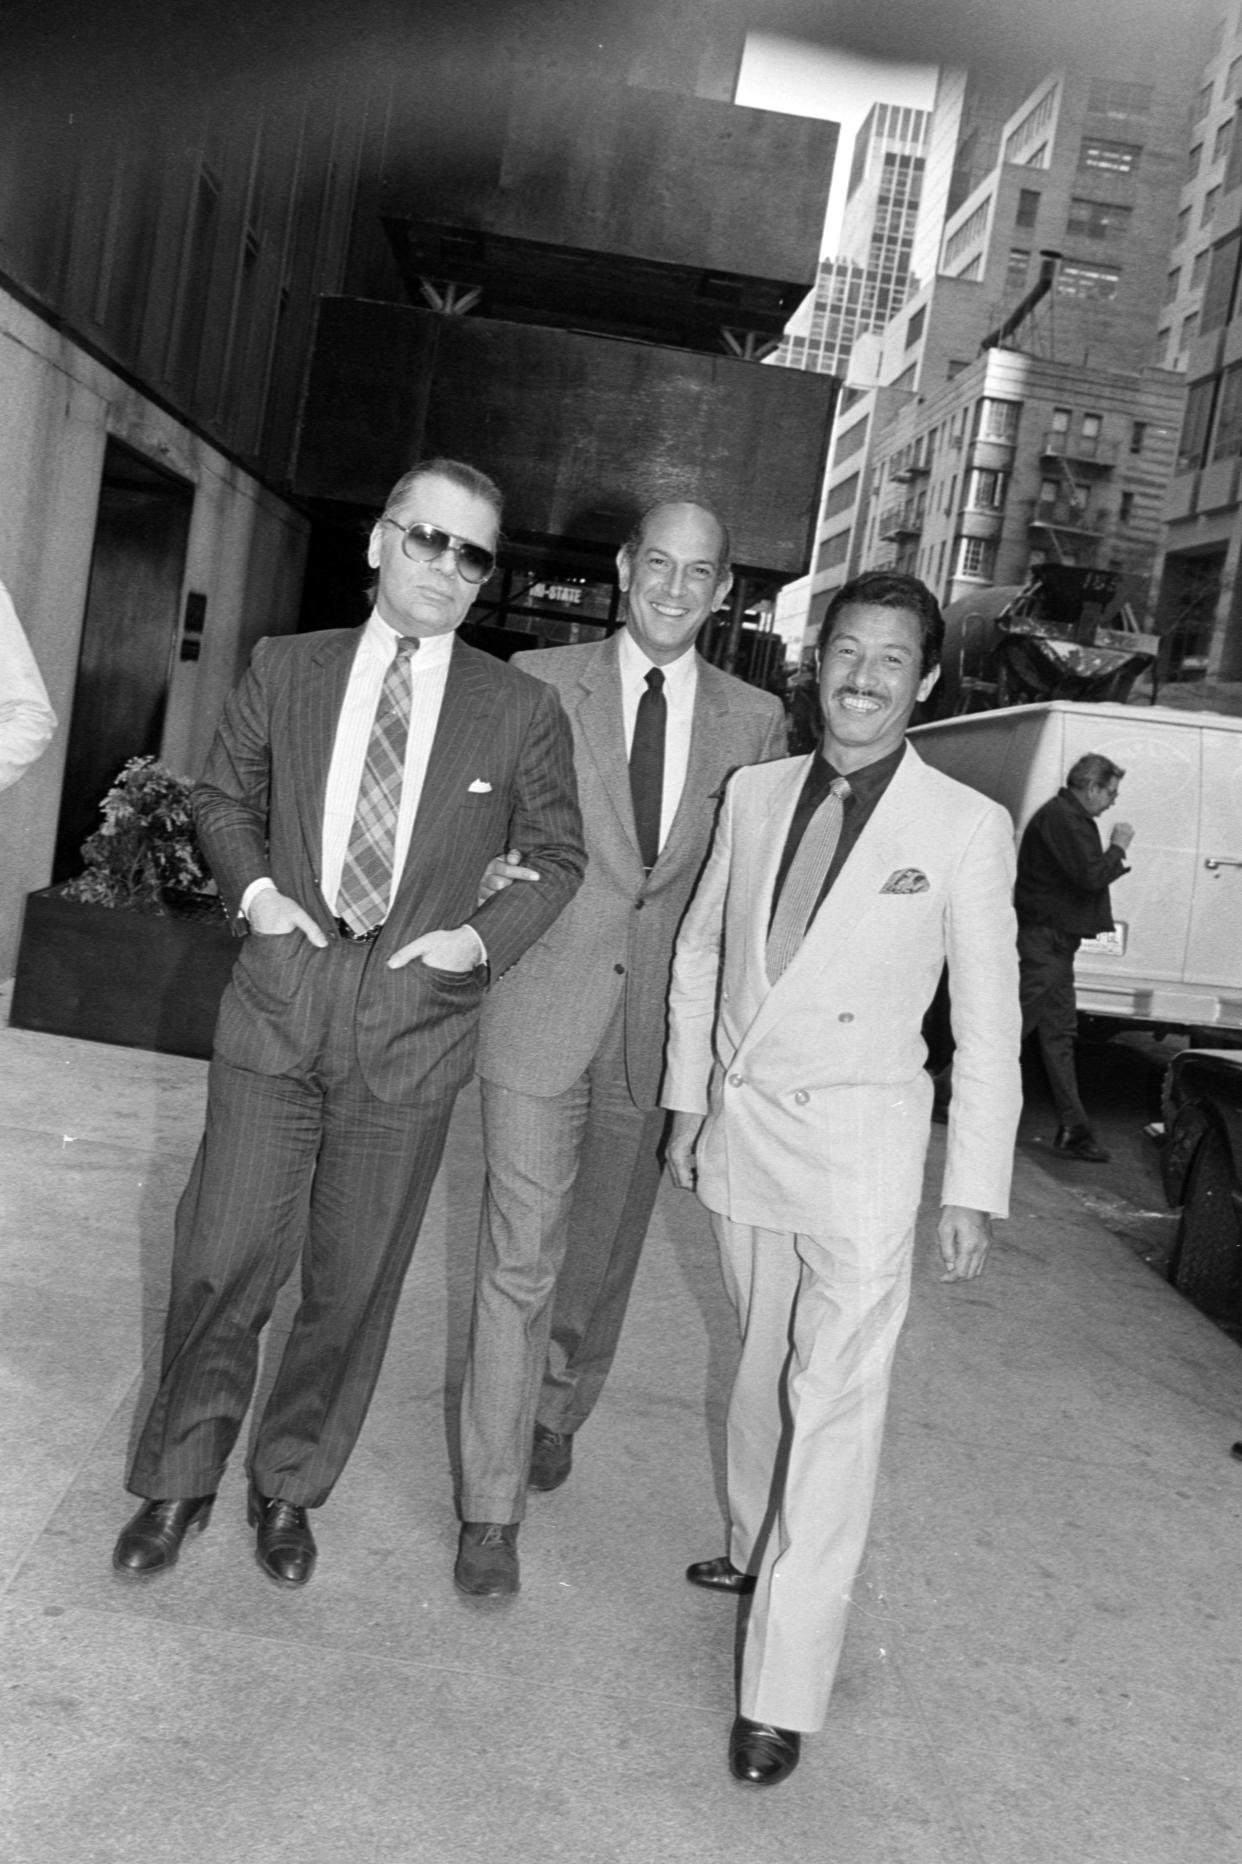 Designers Karl Lagerfeld, Oscar de la Renta and Issey Miyake pose for a portrait outside the Four Seasons Hotel in New York City on April 12, 1984. - Credit: WWD